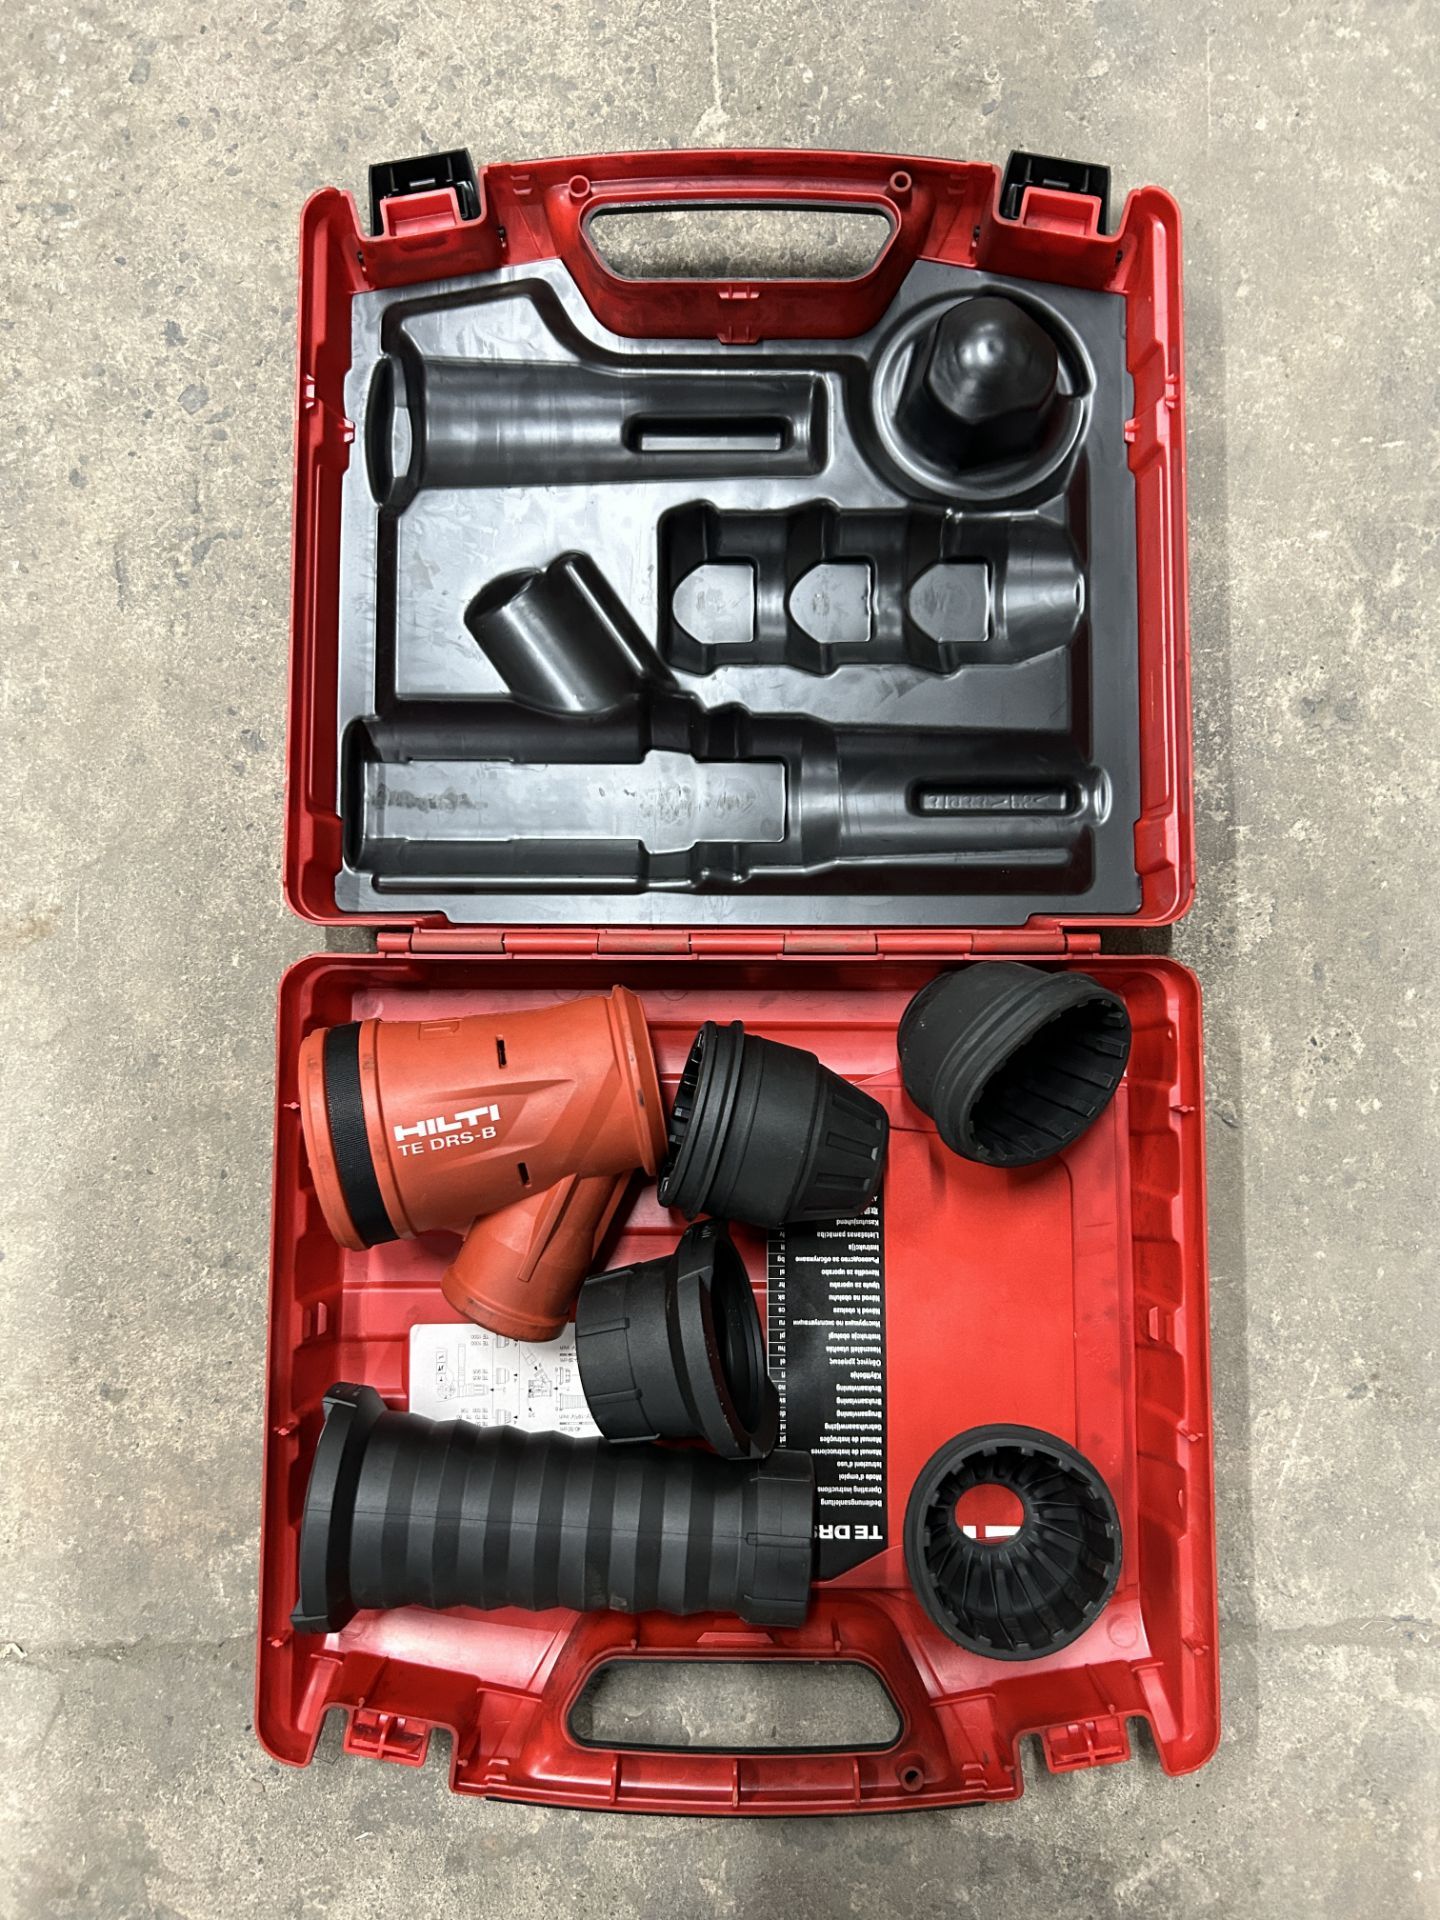 Hilti TE-DRS-B Dust removal system in Case